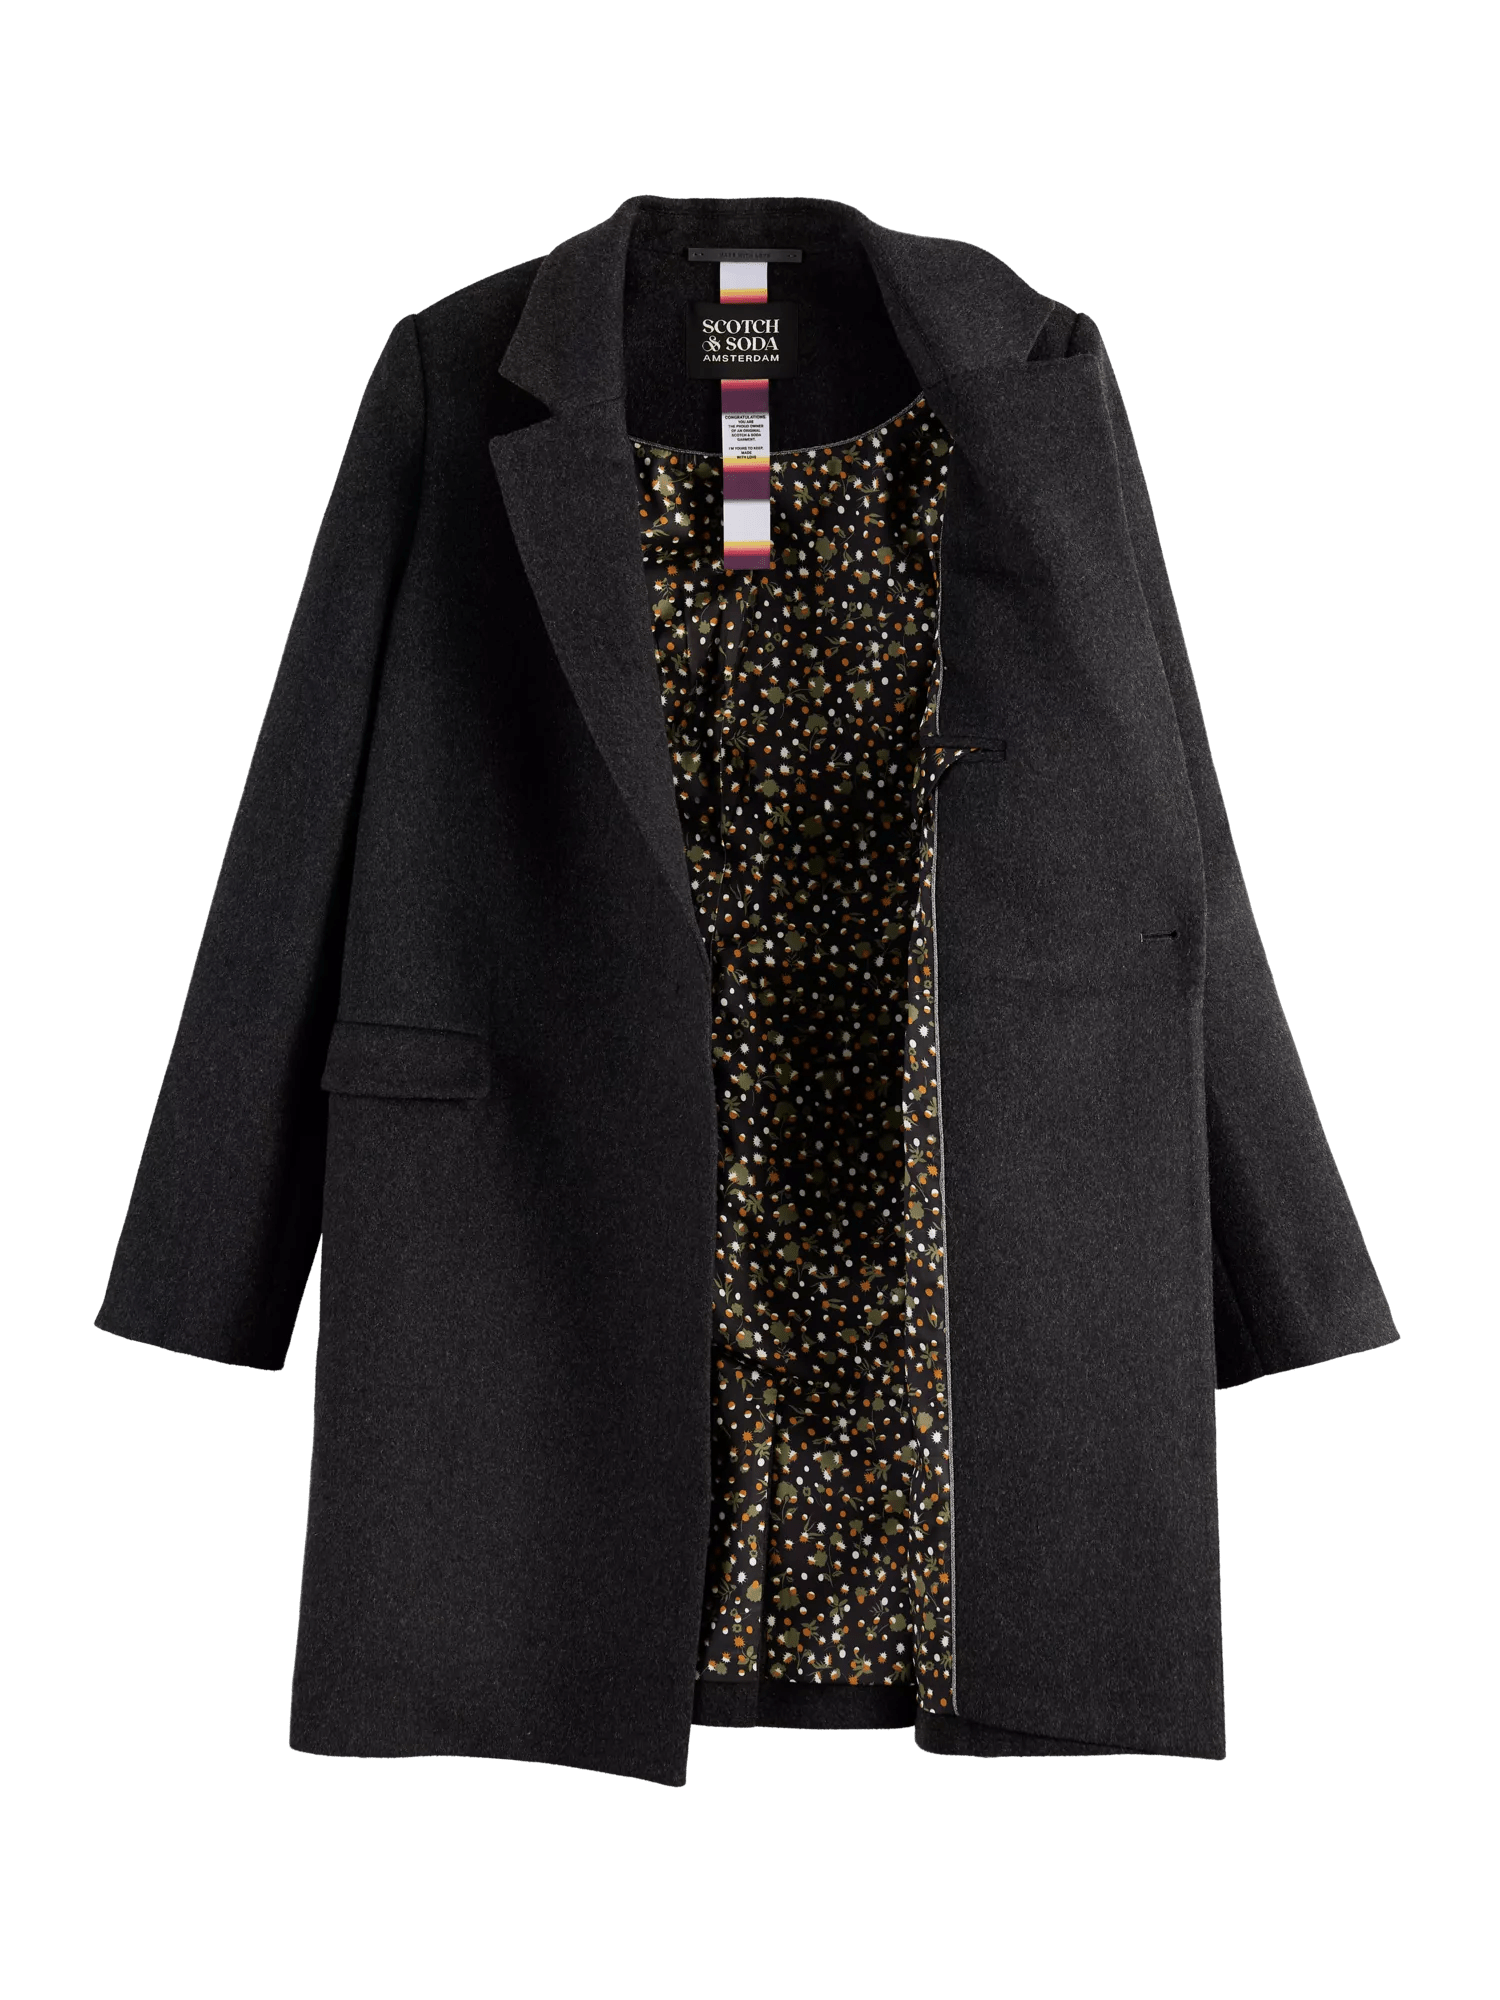 Scotch & Soda Tailored single-breasted wool-blended coat DTL1